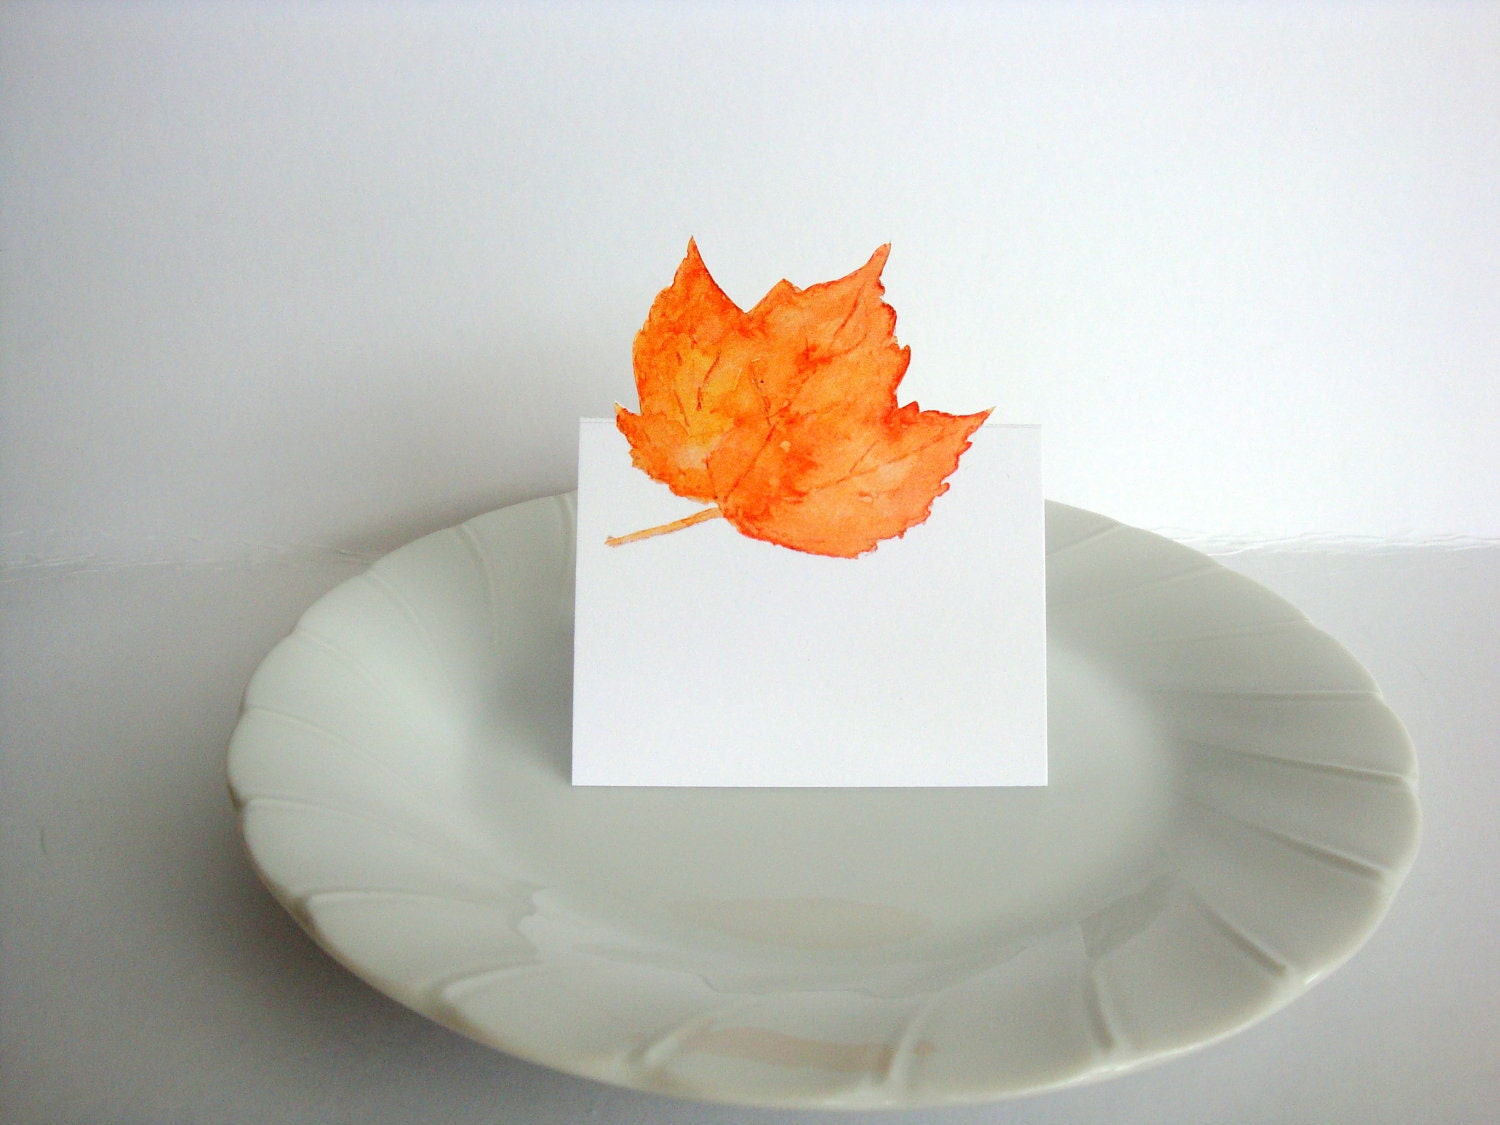 Autumn Orange Maple Leaf - Place Card, Table Number card, Escort cards, weddings events